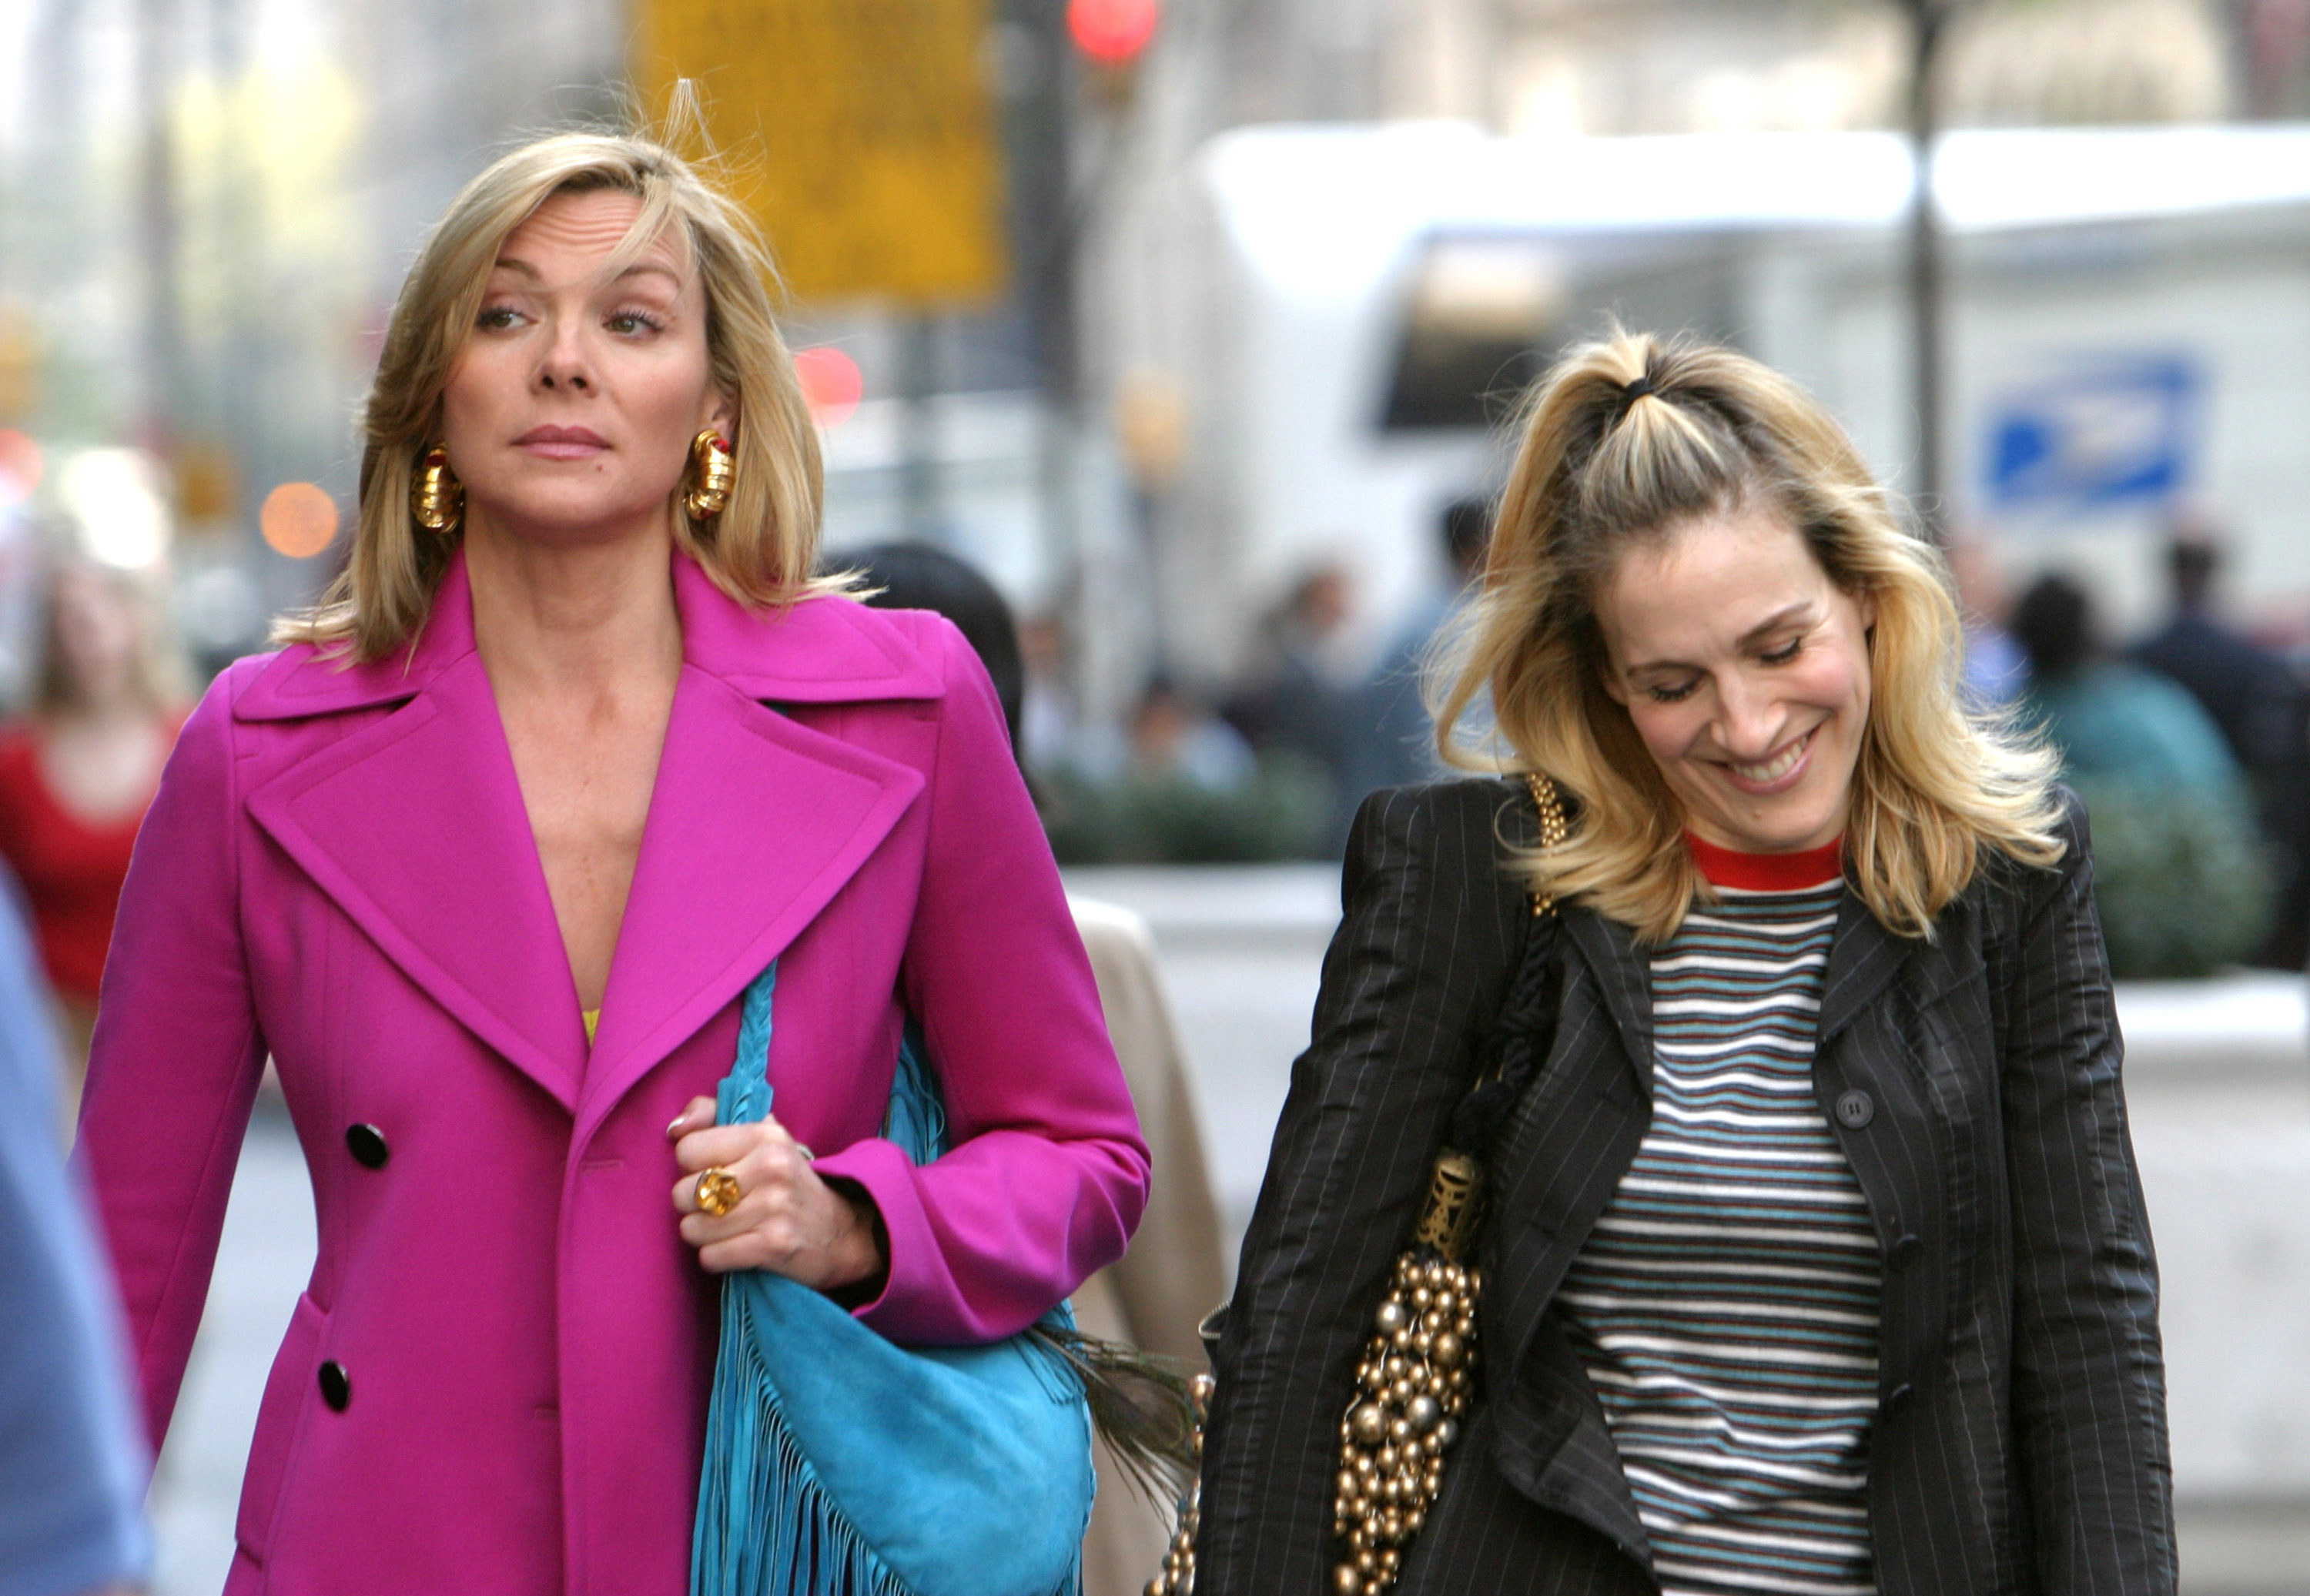 Kim and SJP on the street wearing jackets in a scene from the show